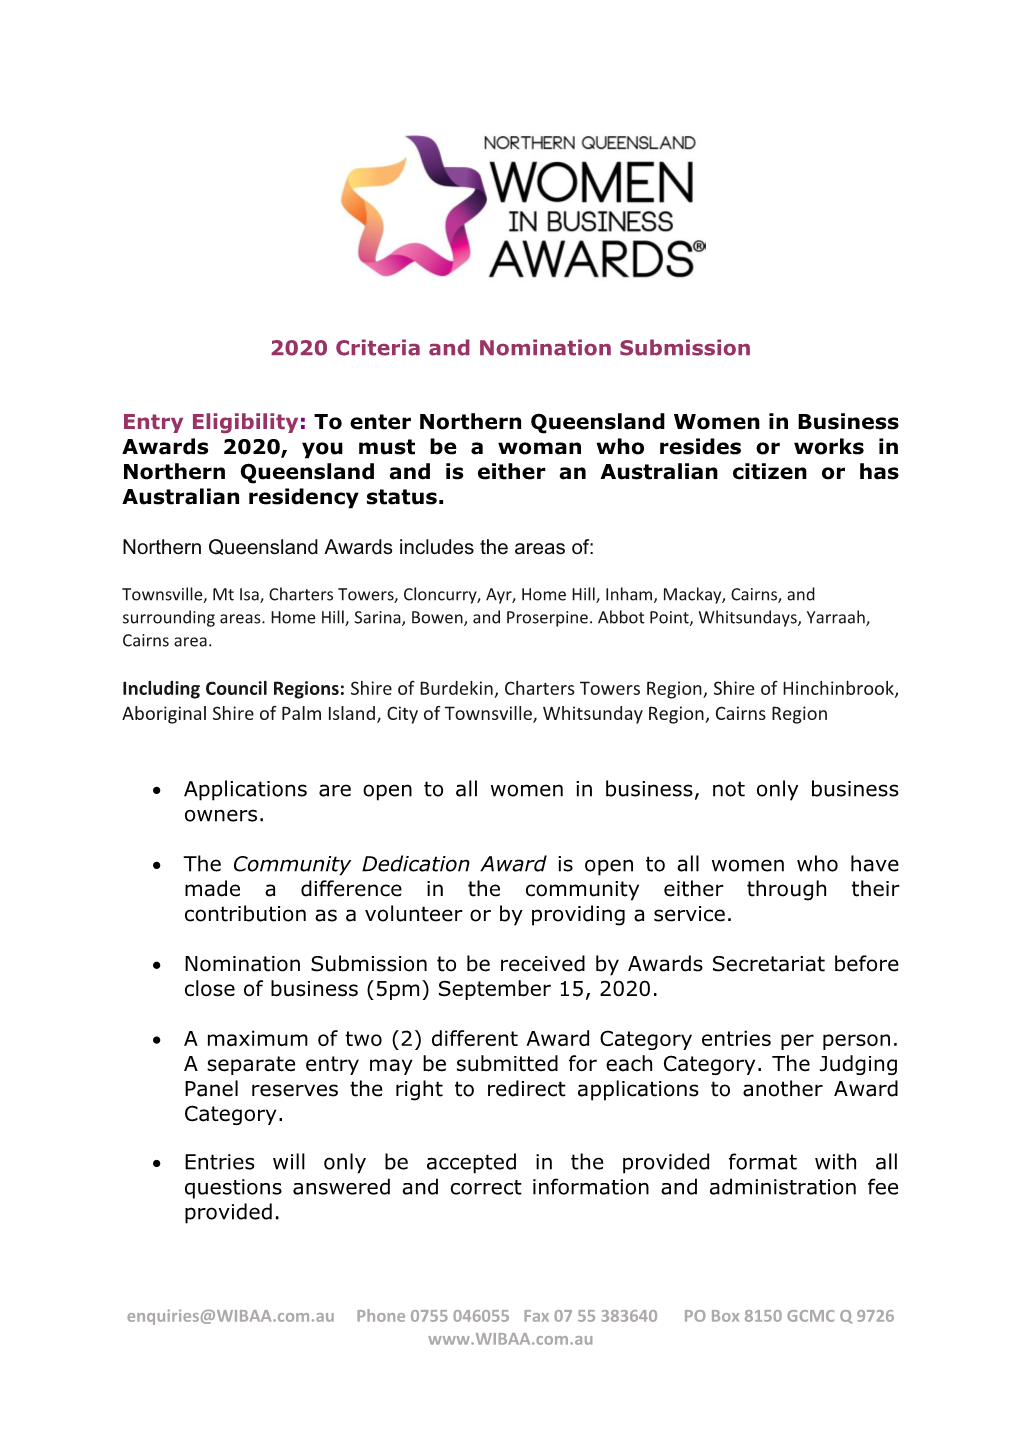 To Enter Northern Queensland Women in Business Awards 2020